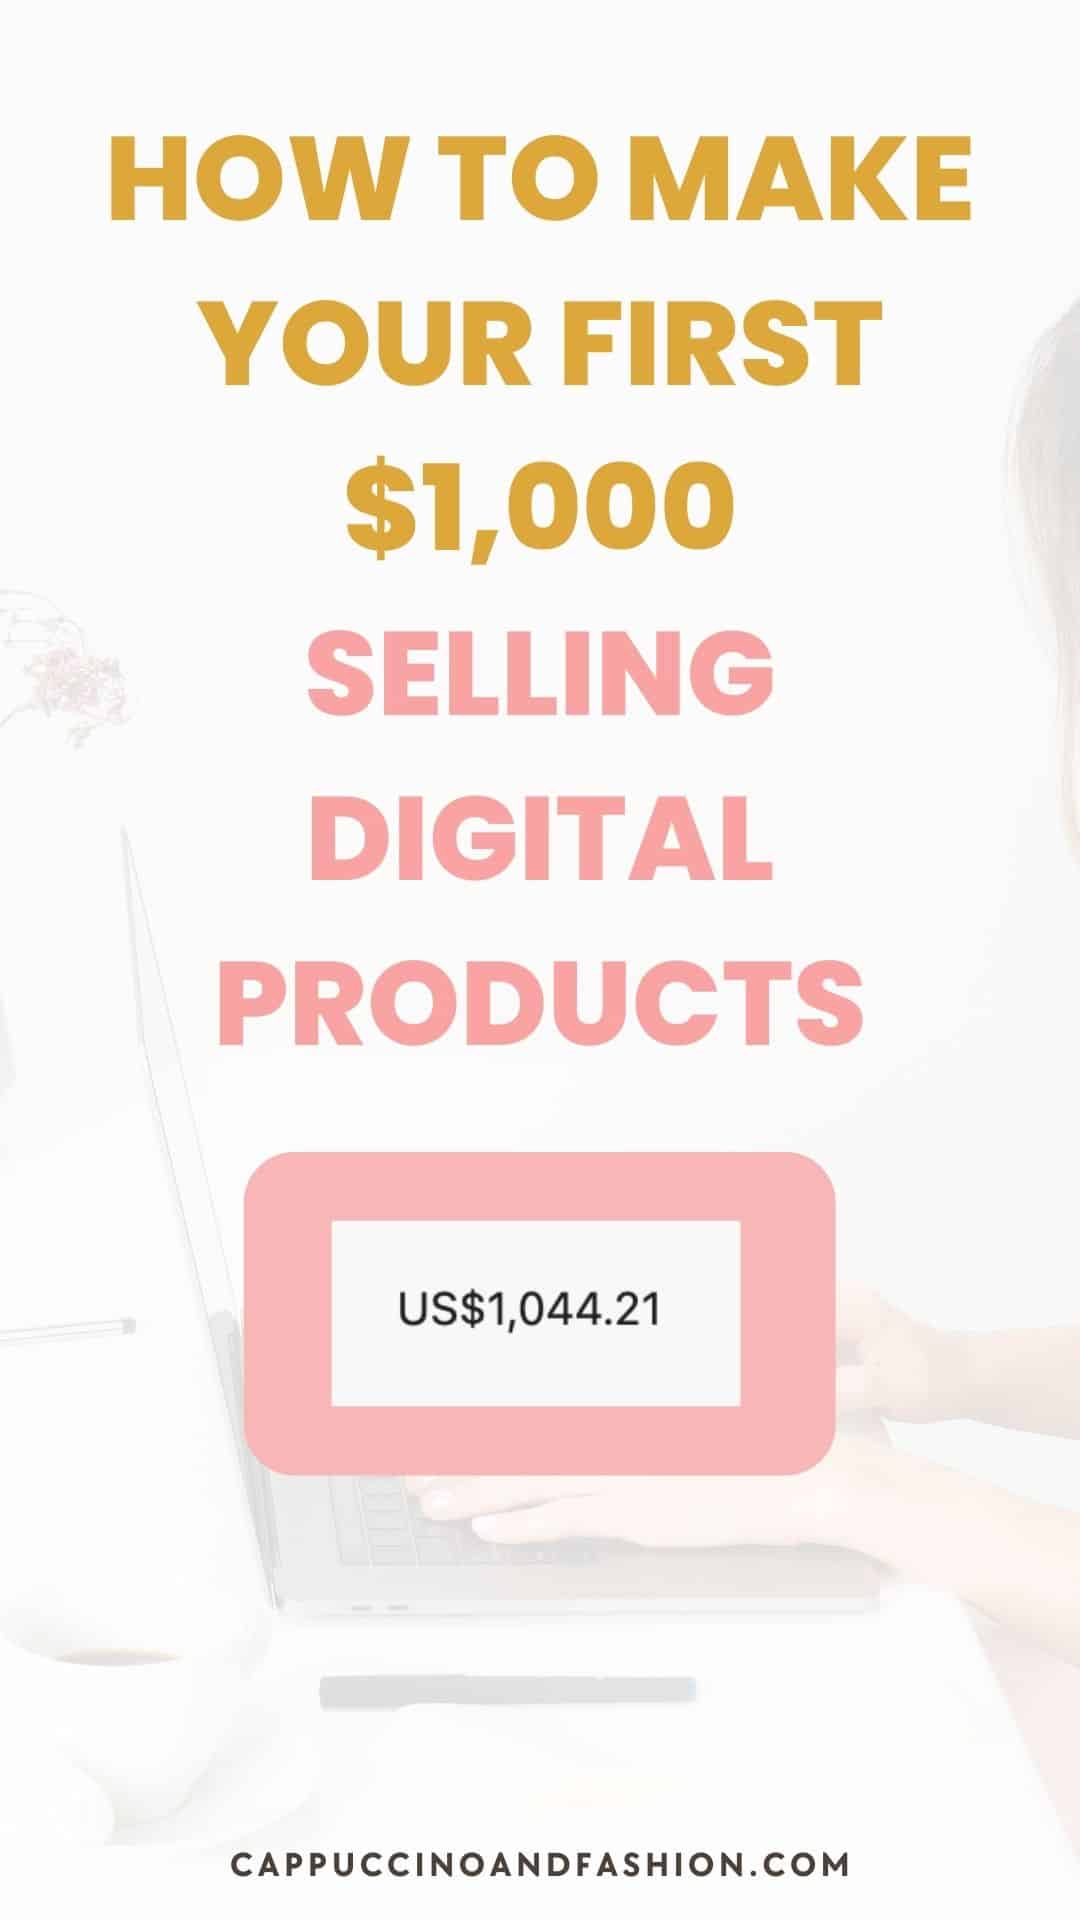 How to Make Your First $1,000 Selling Digital Products on Etsy